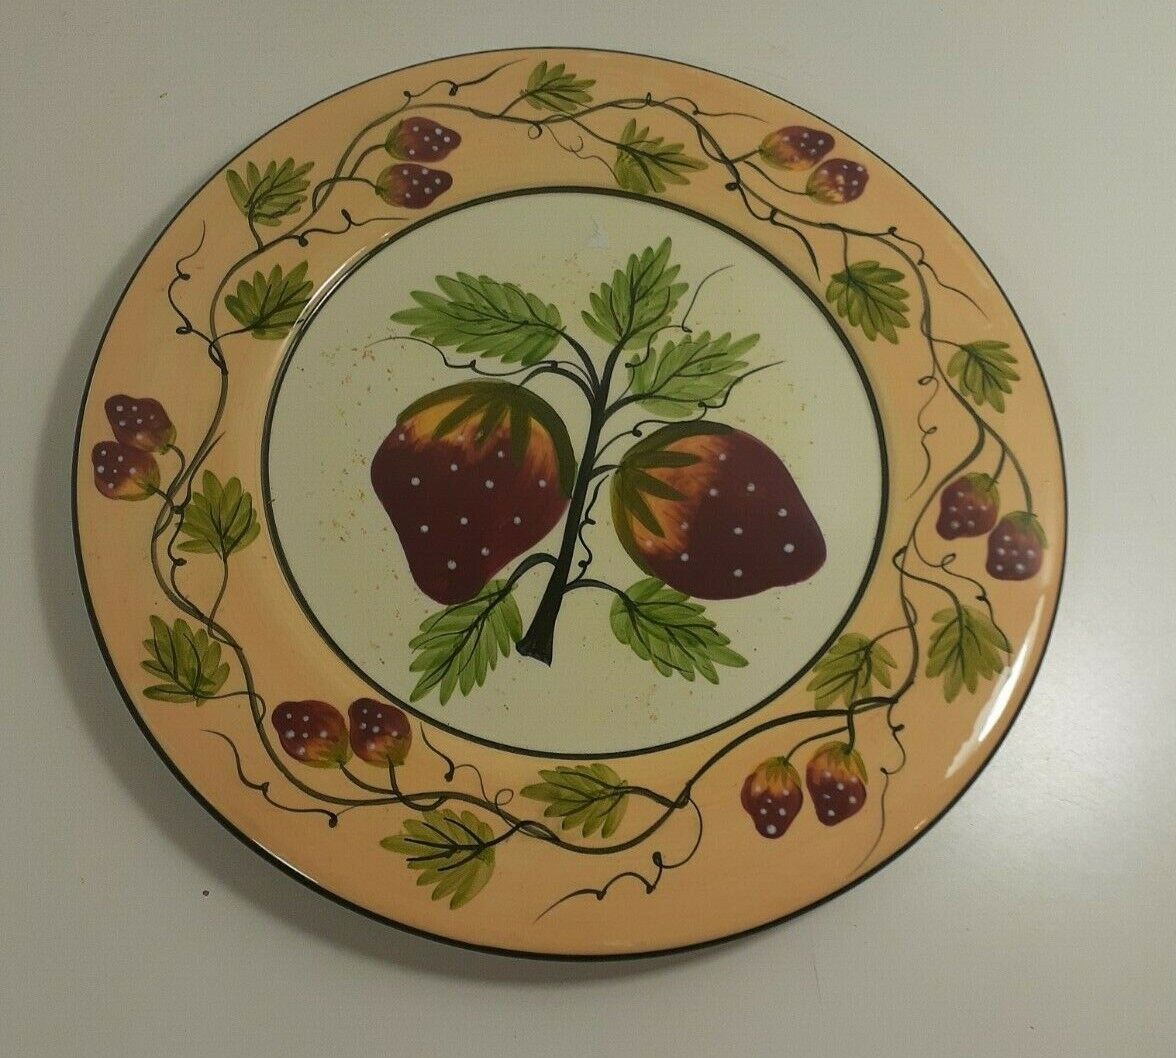 Primary image for Casa Vero By ACK strawberry Pattern Italian Glaze Pottery Dinner Platers 9 1/2 